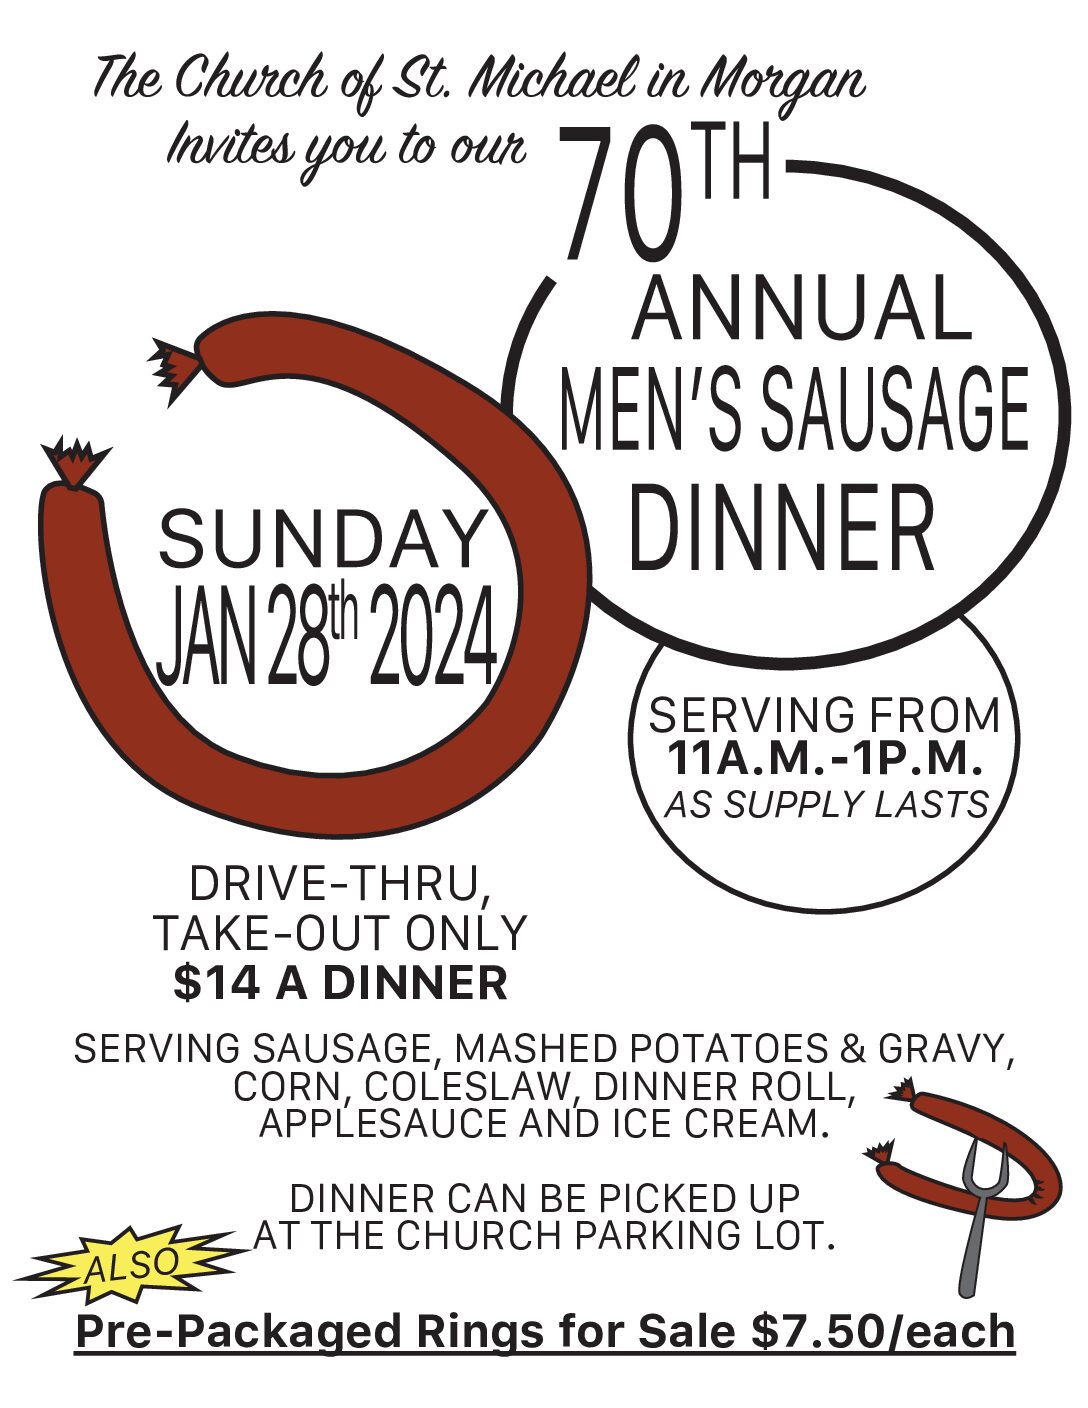 <h1 class="tribe-events-single-event-title">70th Annual Men’s Sausage Dinner</h1>